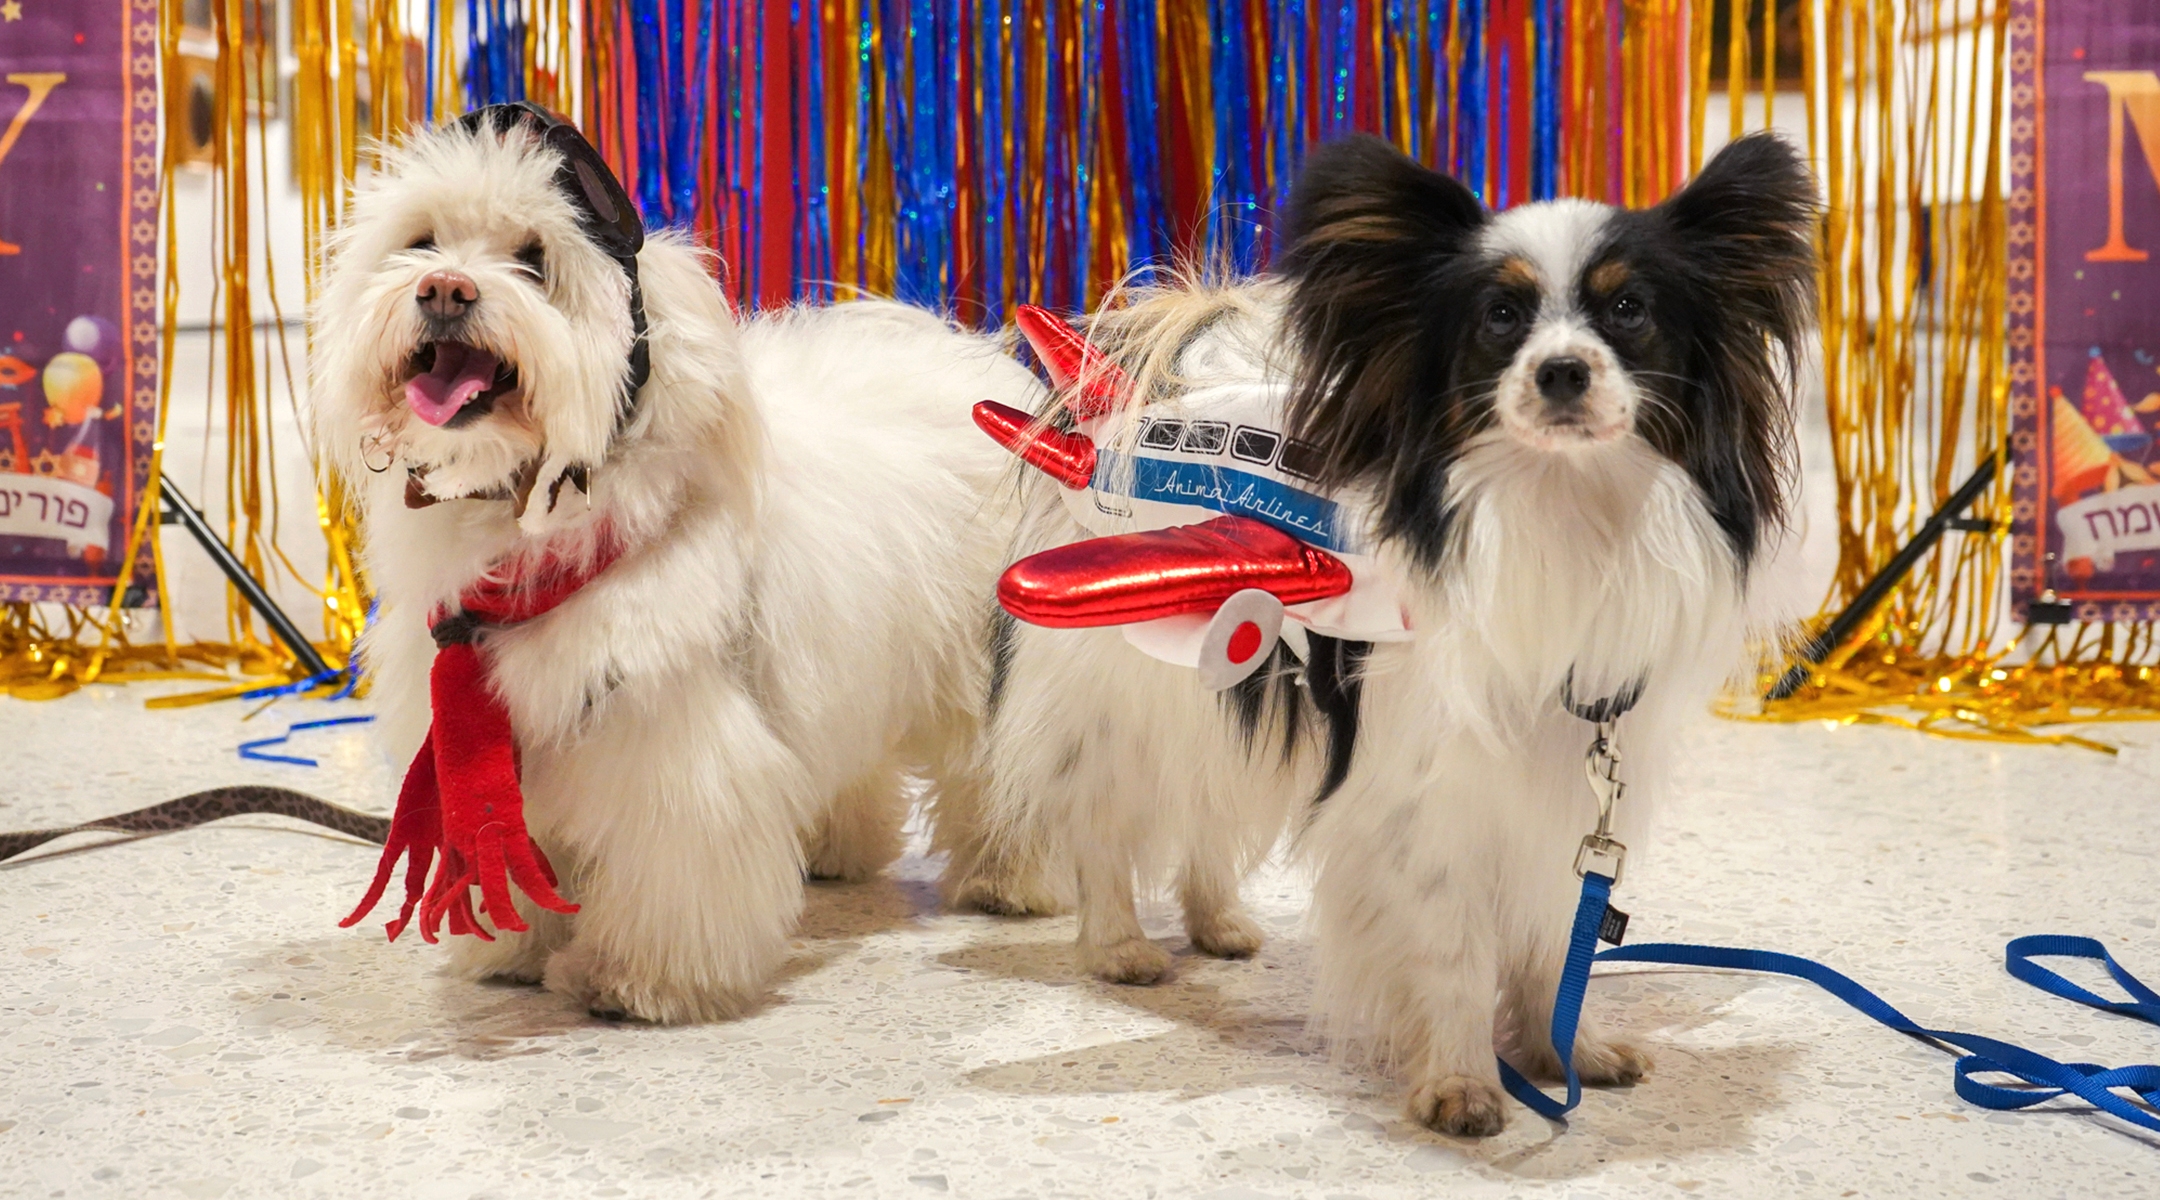 The Jewish holiday of Purim has gone to the dogs